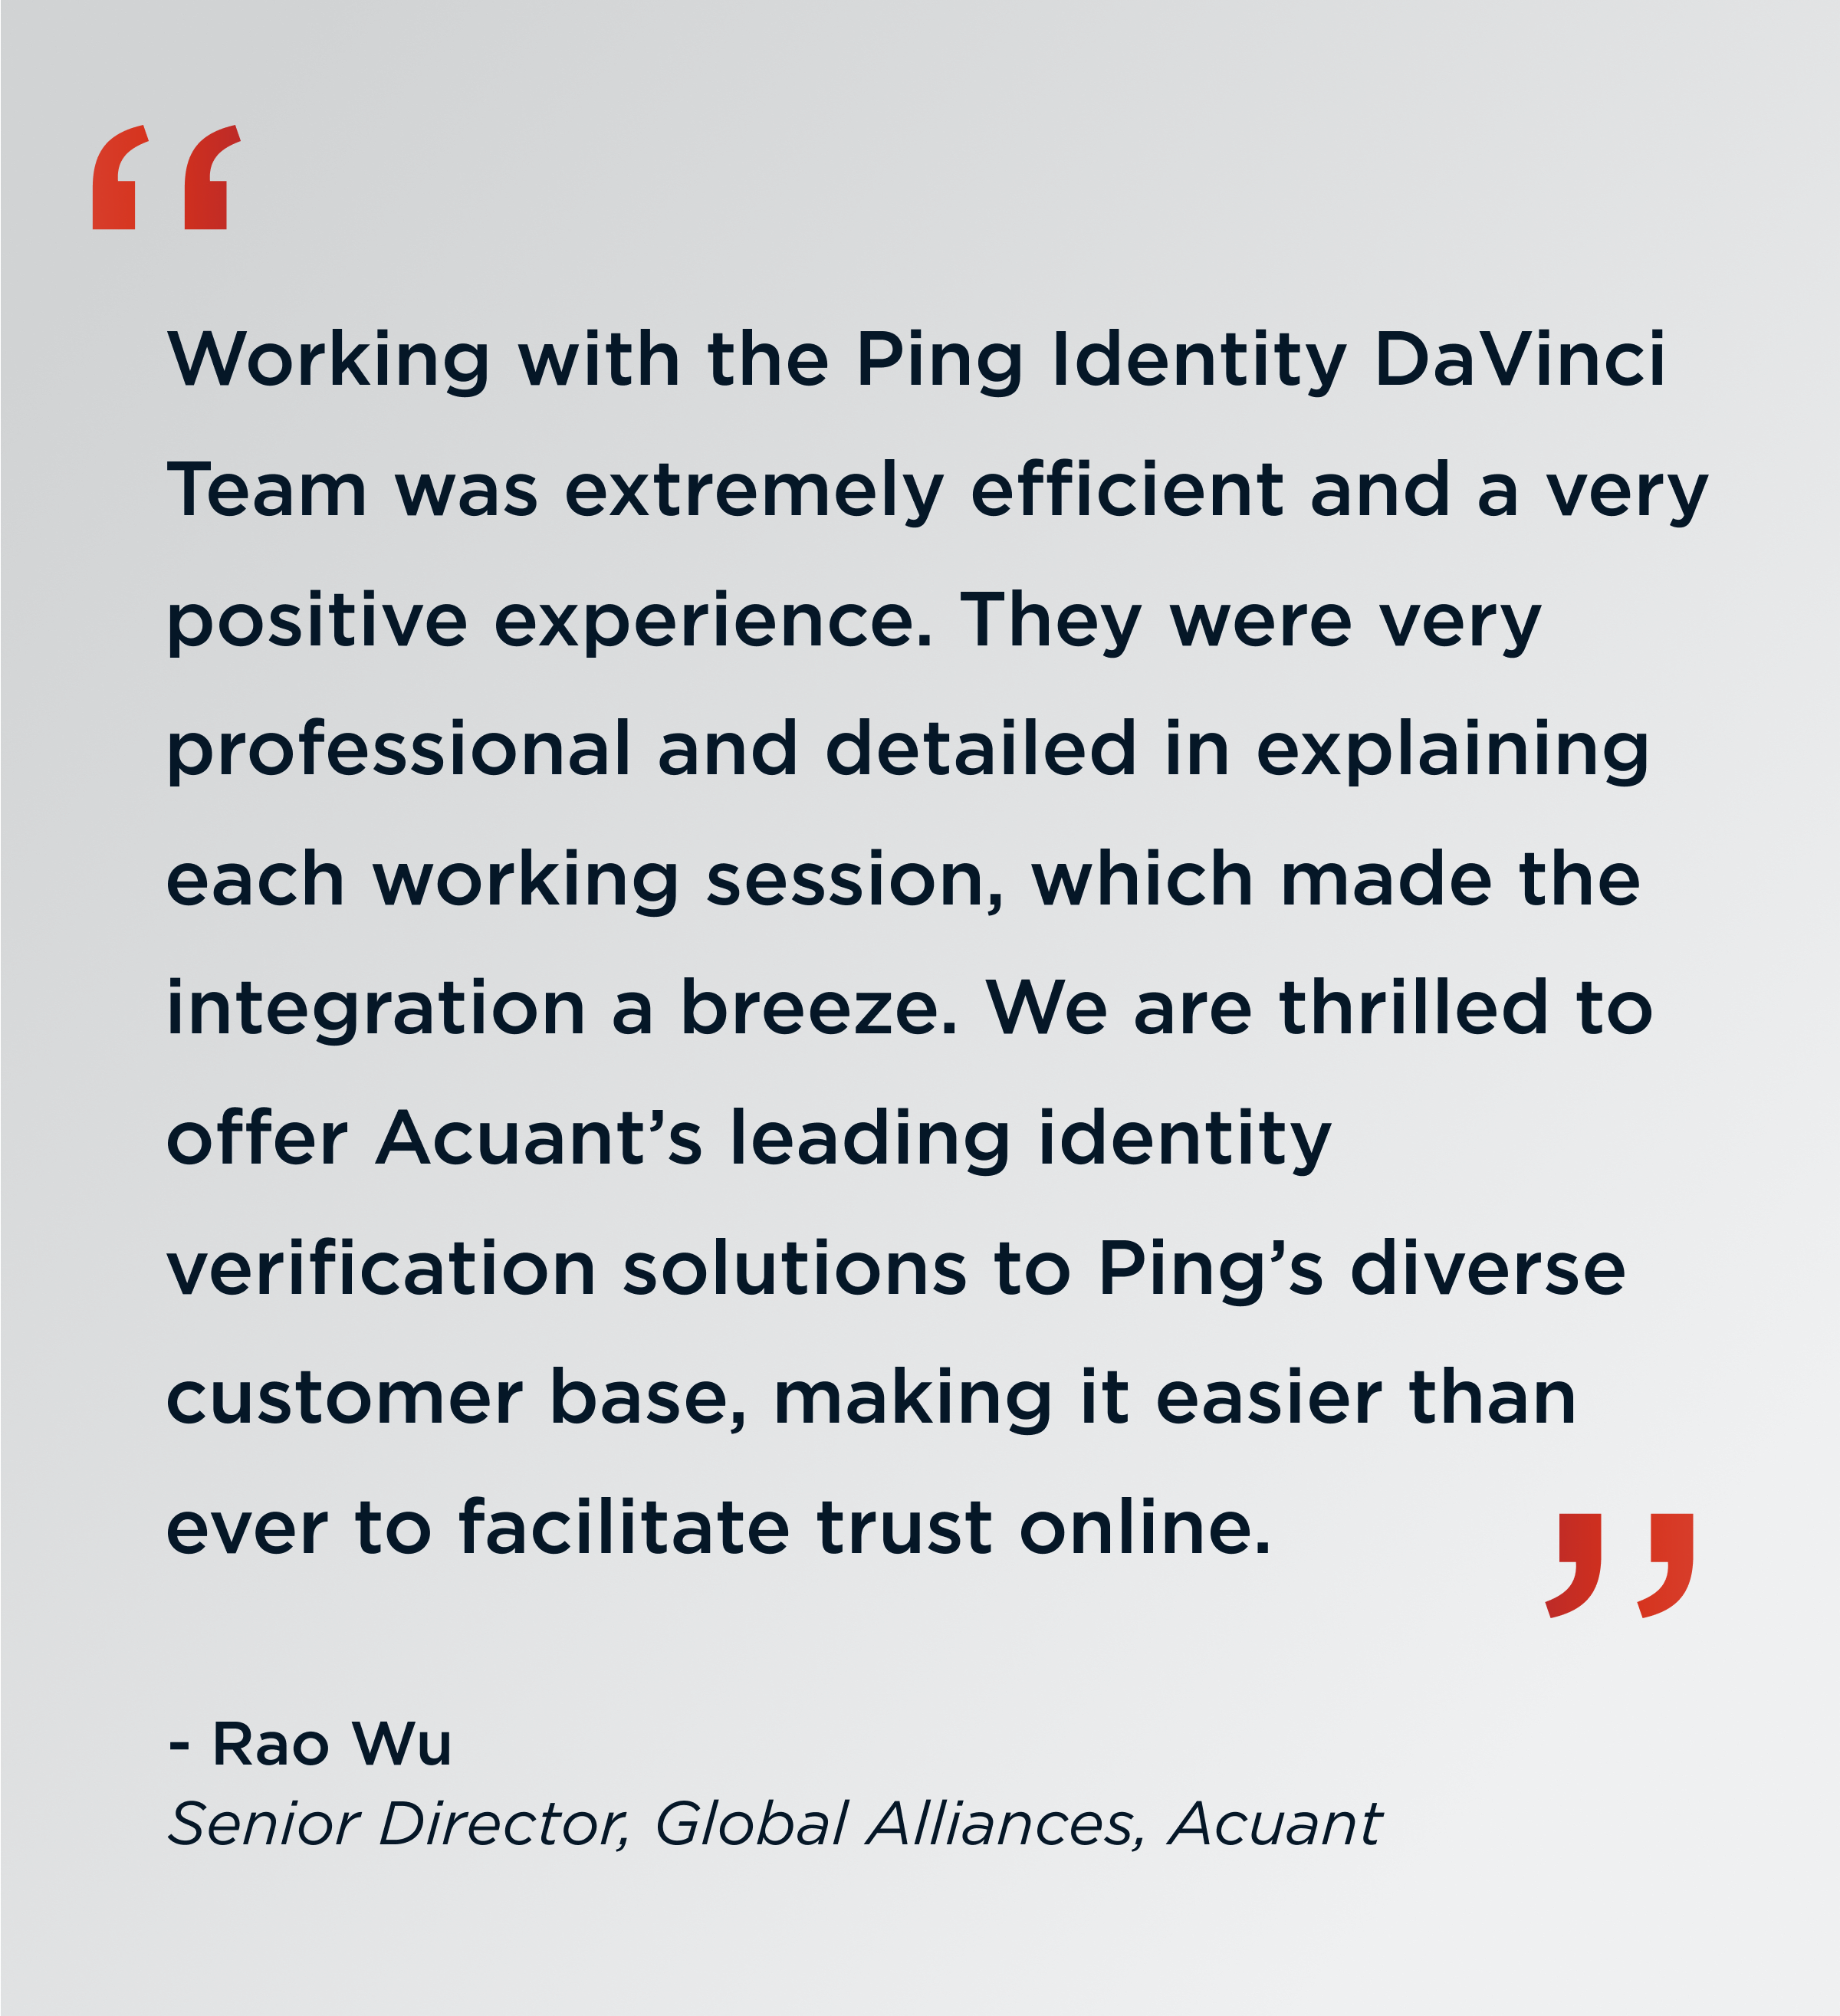 Quote. Working with the ping identity davinci team was extremely efficient and a very positive experience. They where very professional and detailed in explaining each working session, which made the integration a breeze. We are thrilled to offer Acuant’s leading identity verification solutions to Ping’s diverse customer base, making it easier than ever to facilitate trust online. End quote. Rao Wu Senior Director, Global Alliances, Acuant